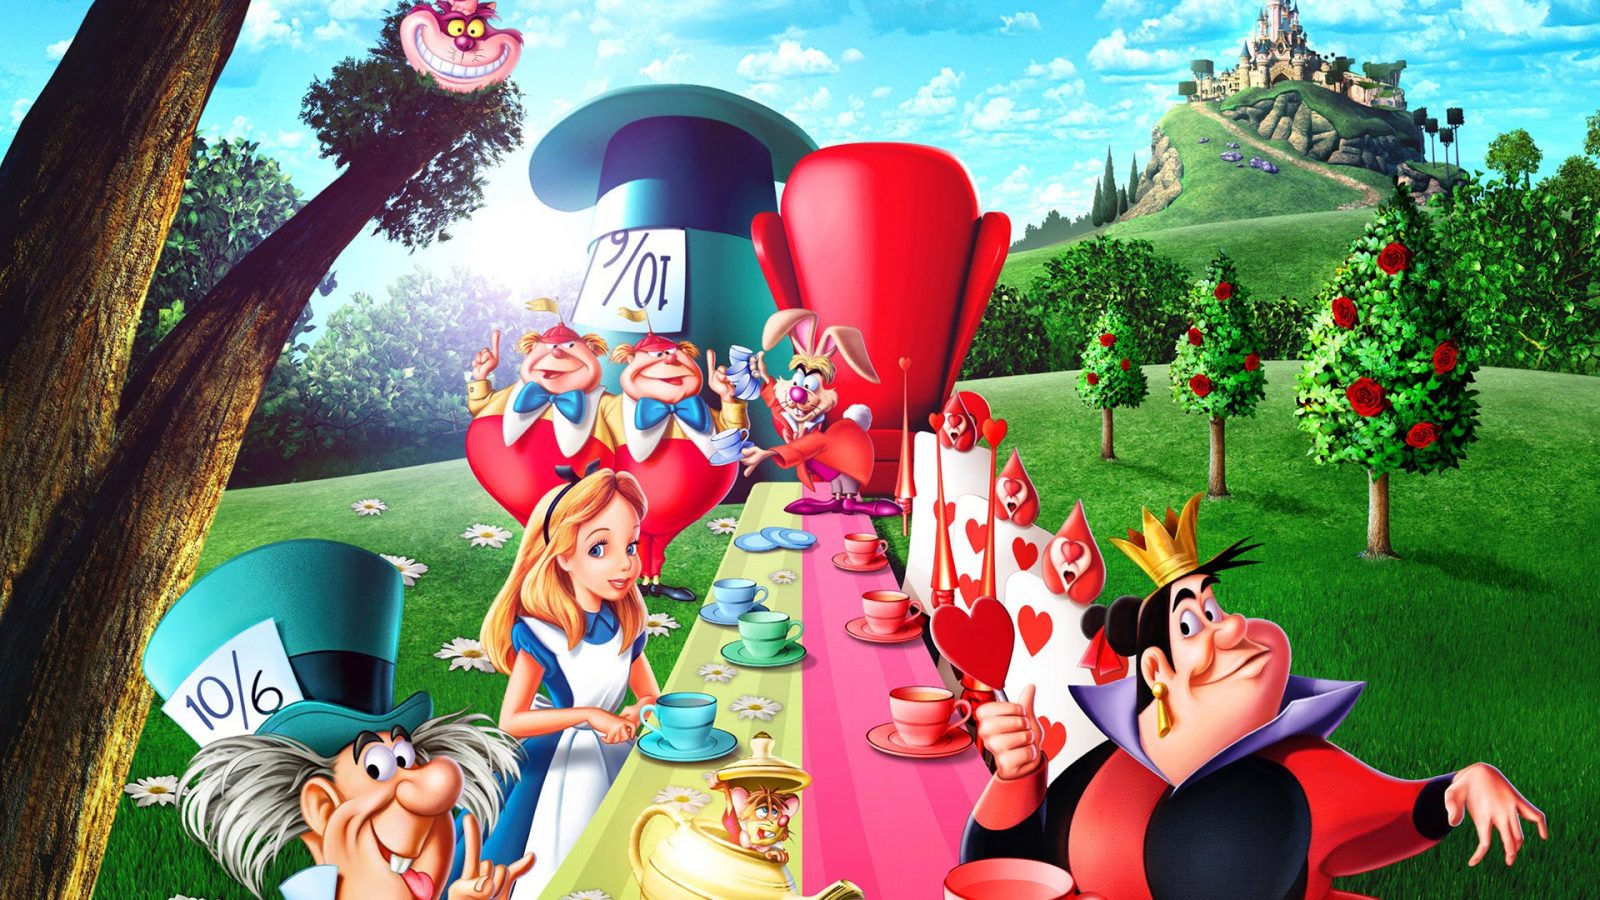 Most Disney Fans Can’t Identify More Than 15/18 of These Movie Foods – Can You? Alice In Wonderland 1951